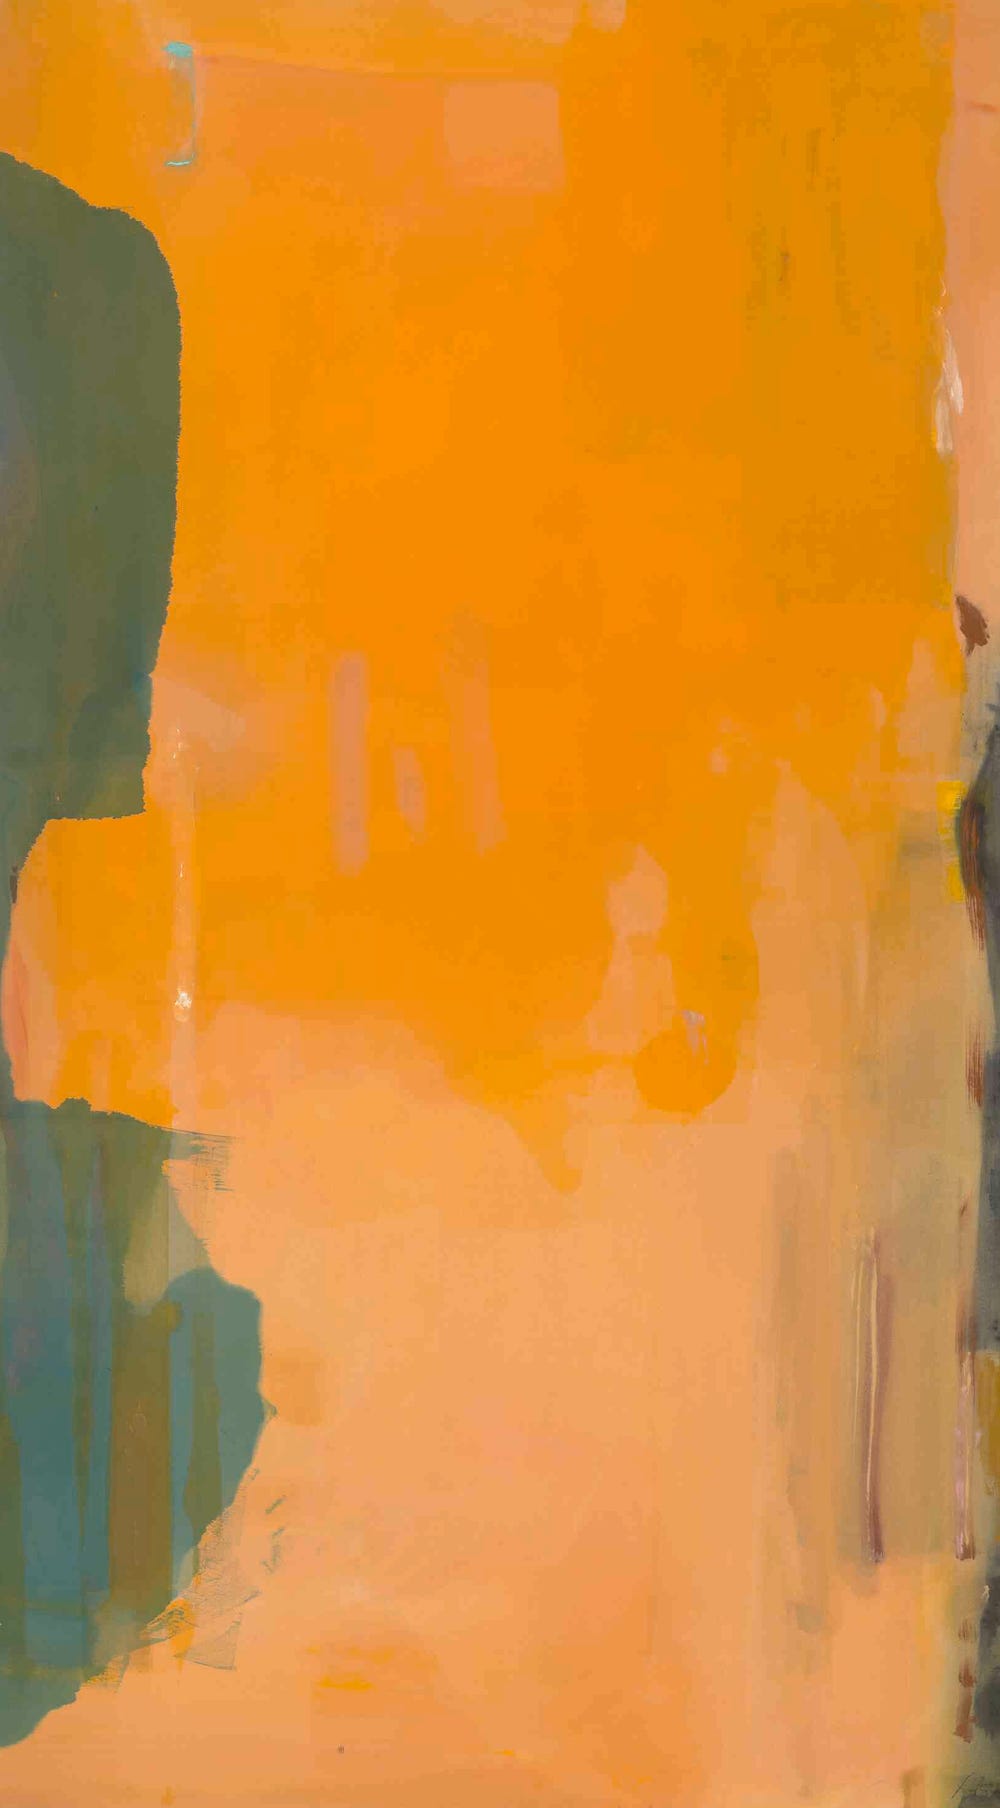 Abstract soak-stain painting by Helen Frankenthaler